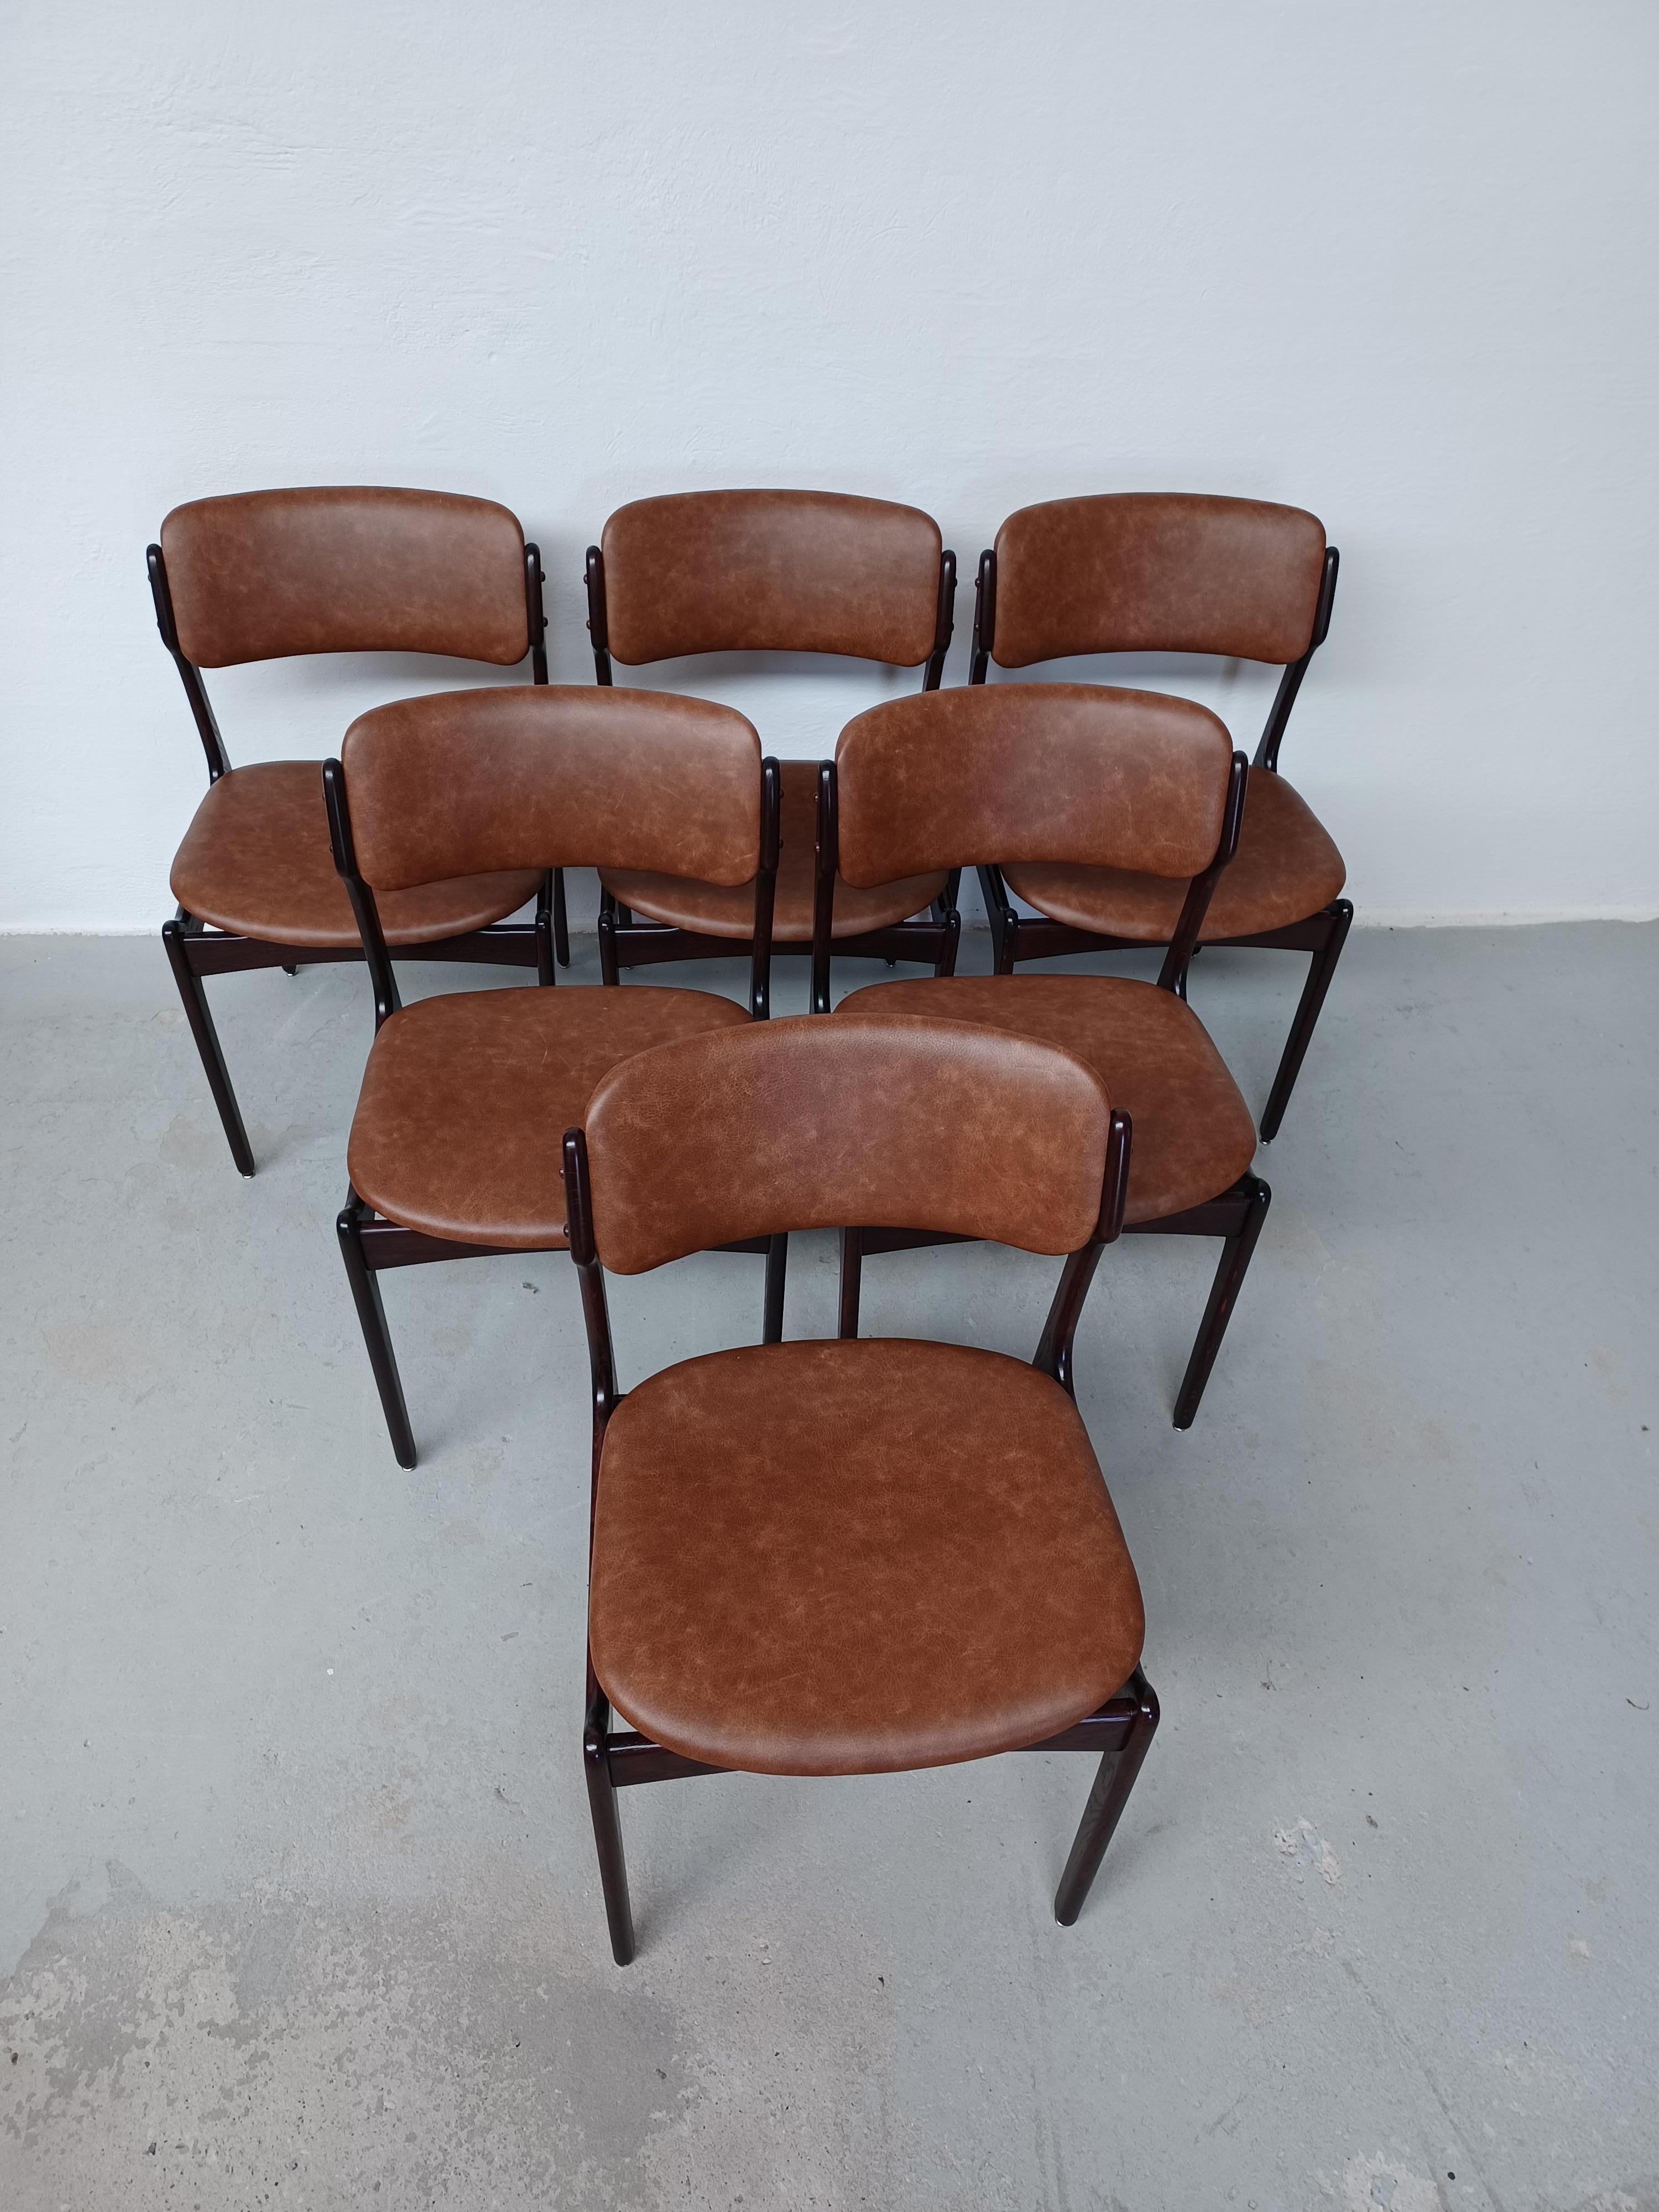 1960s set of six  fully restored Erik Buch dining chairs in tanned oak and custom upholstery.

The chairs have a simple yet solid construction with elegant lines and provide a very comfortable seating experience on the elegant floating seat design